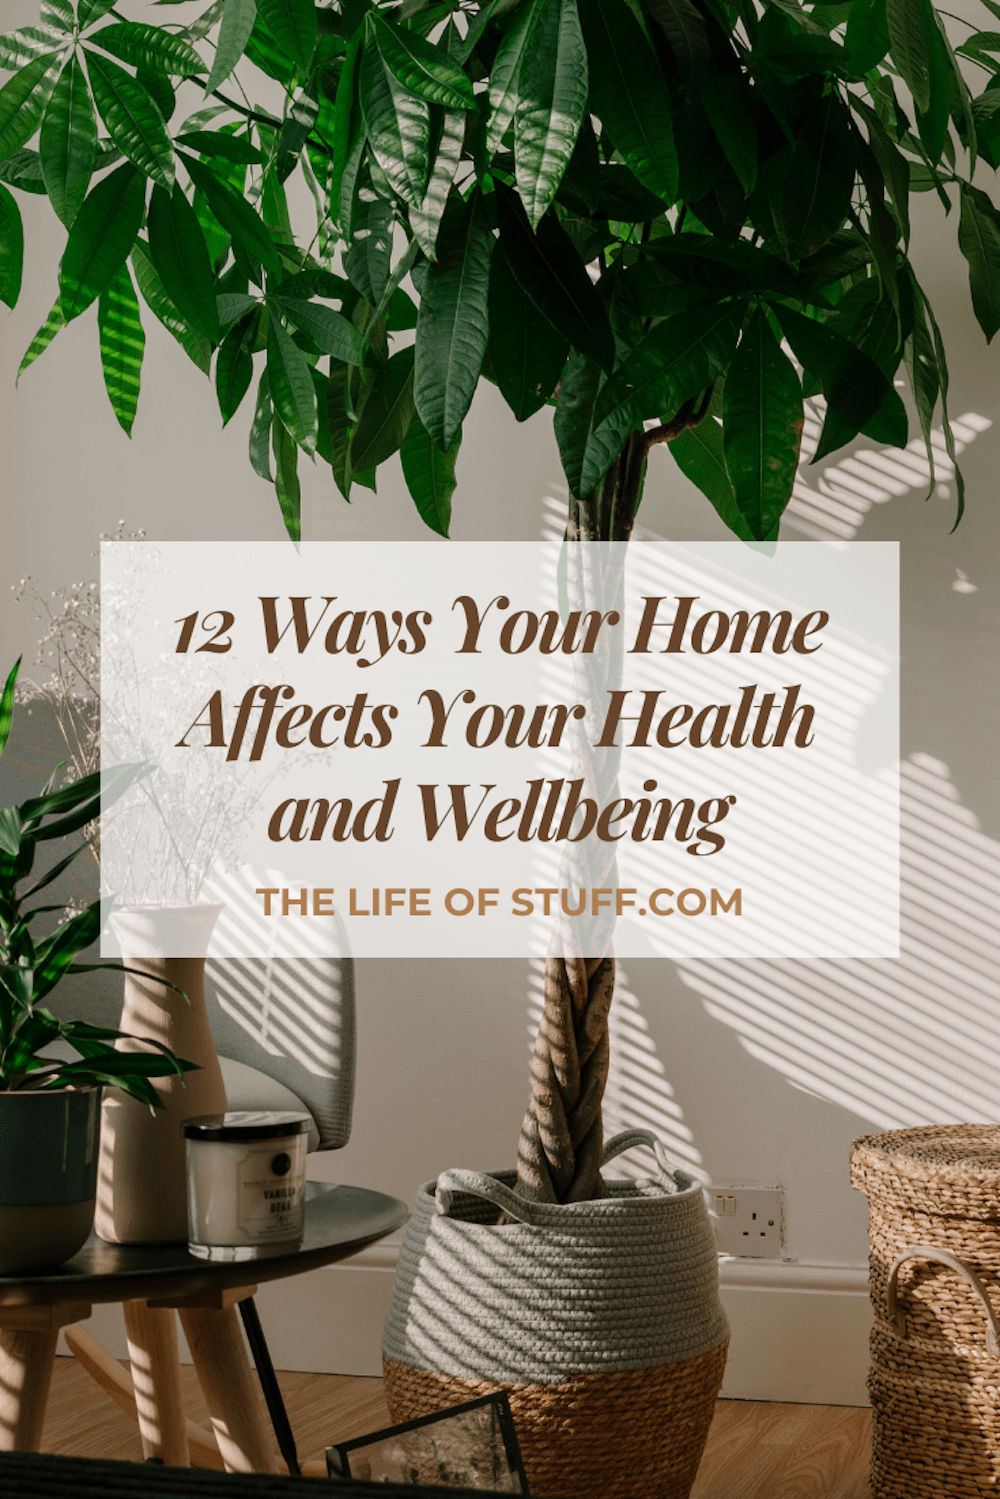 12 Ways Your Home Affects Your Health and Wellbeing - The Life of Stuff